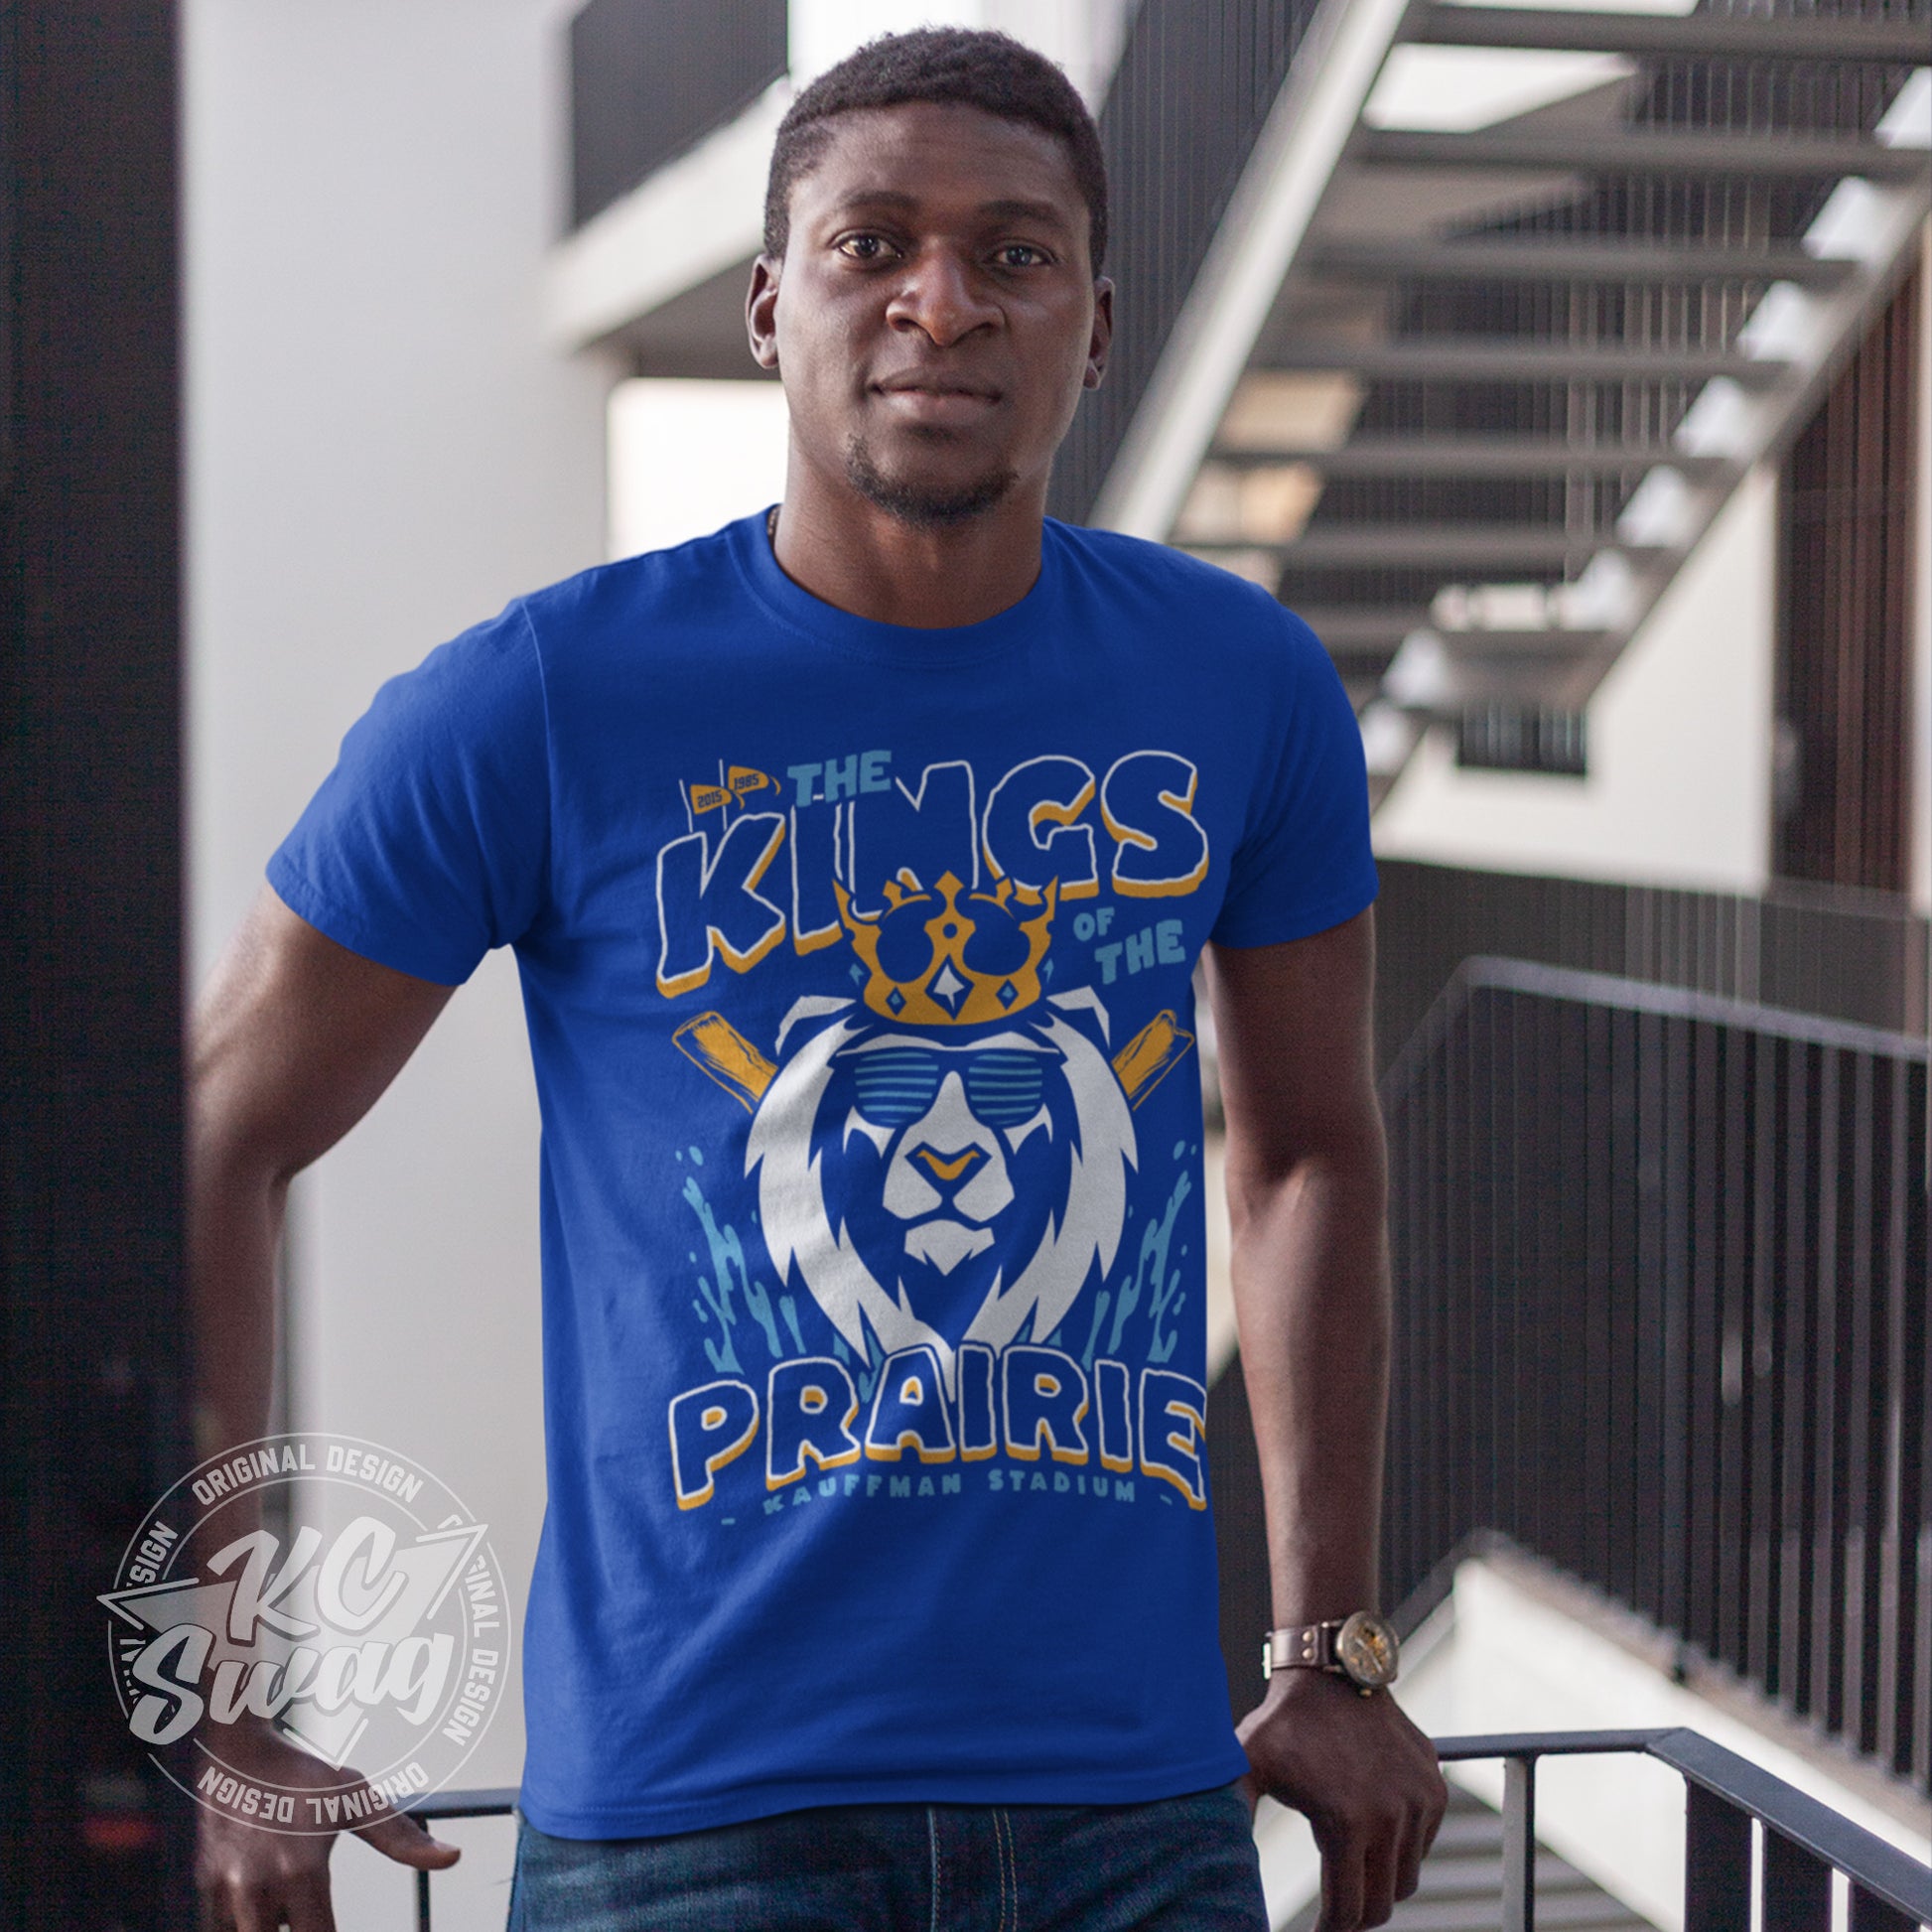 KC Swag - Kansas City Royals, Kings Of The Prairie design on royal blue unisex t-shirt worn by male model leaning on railing on an apartment balcony